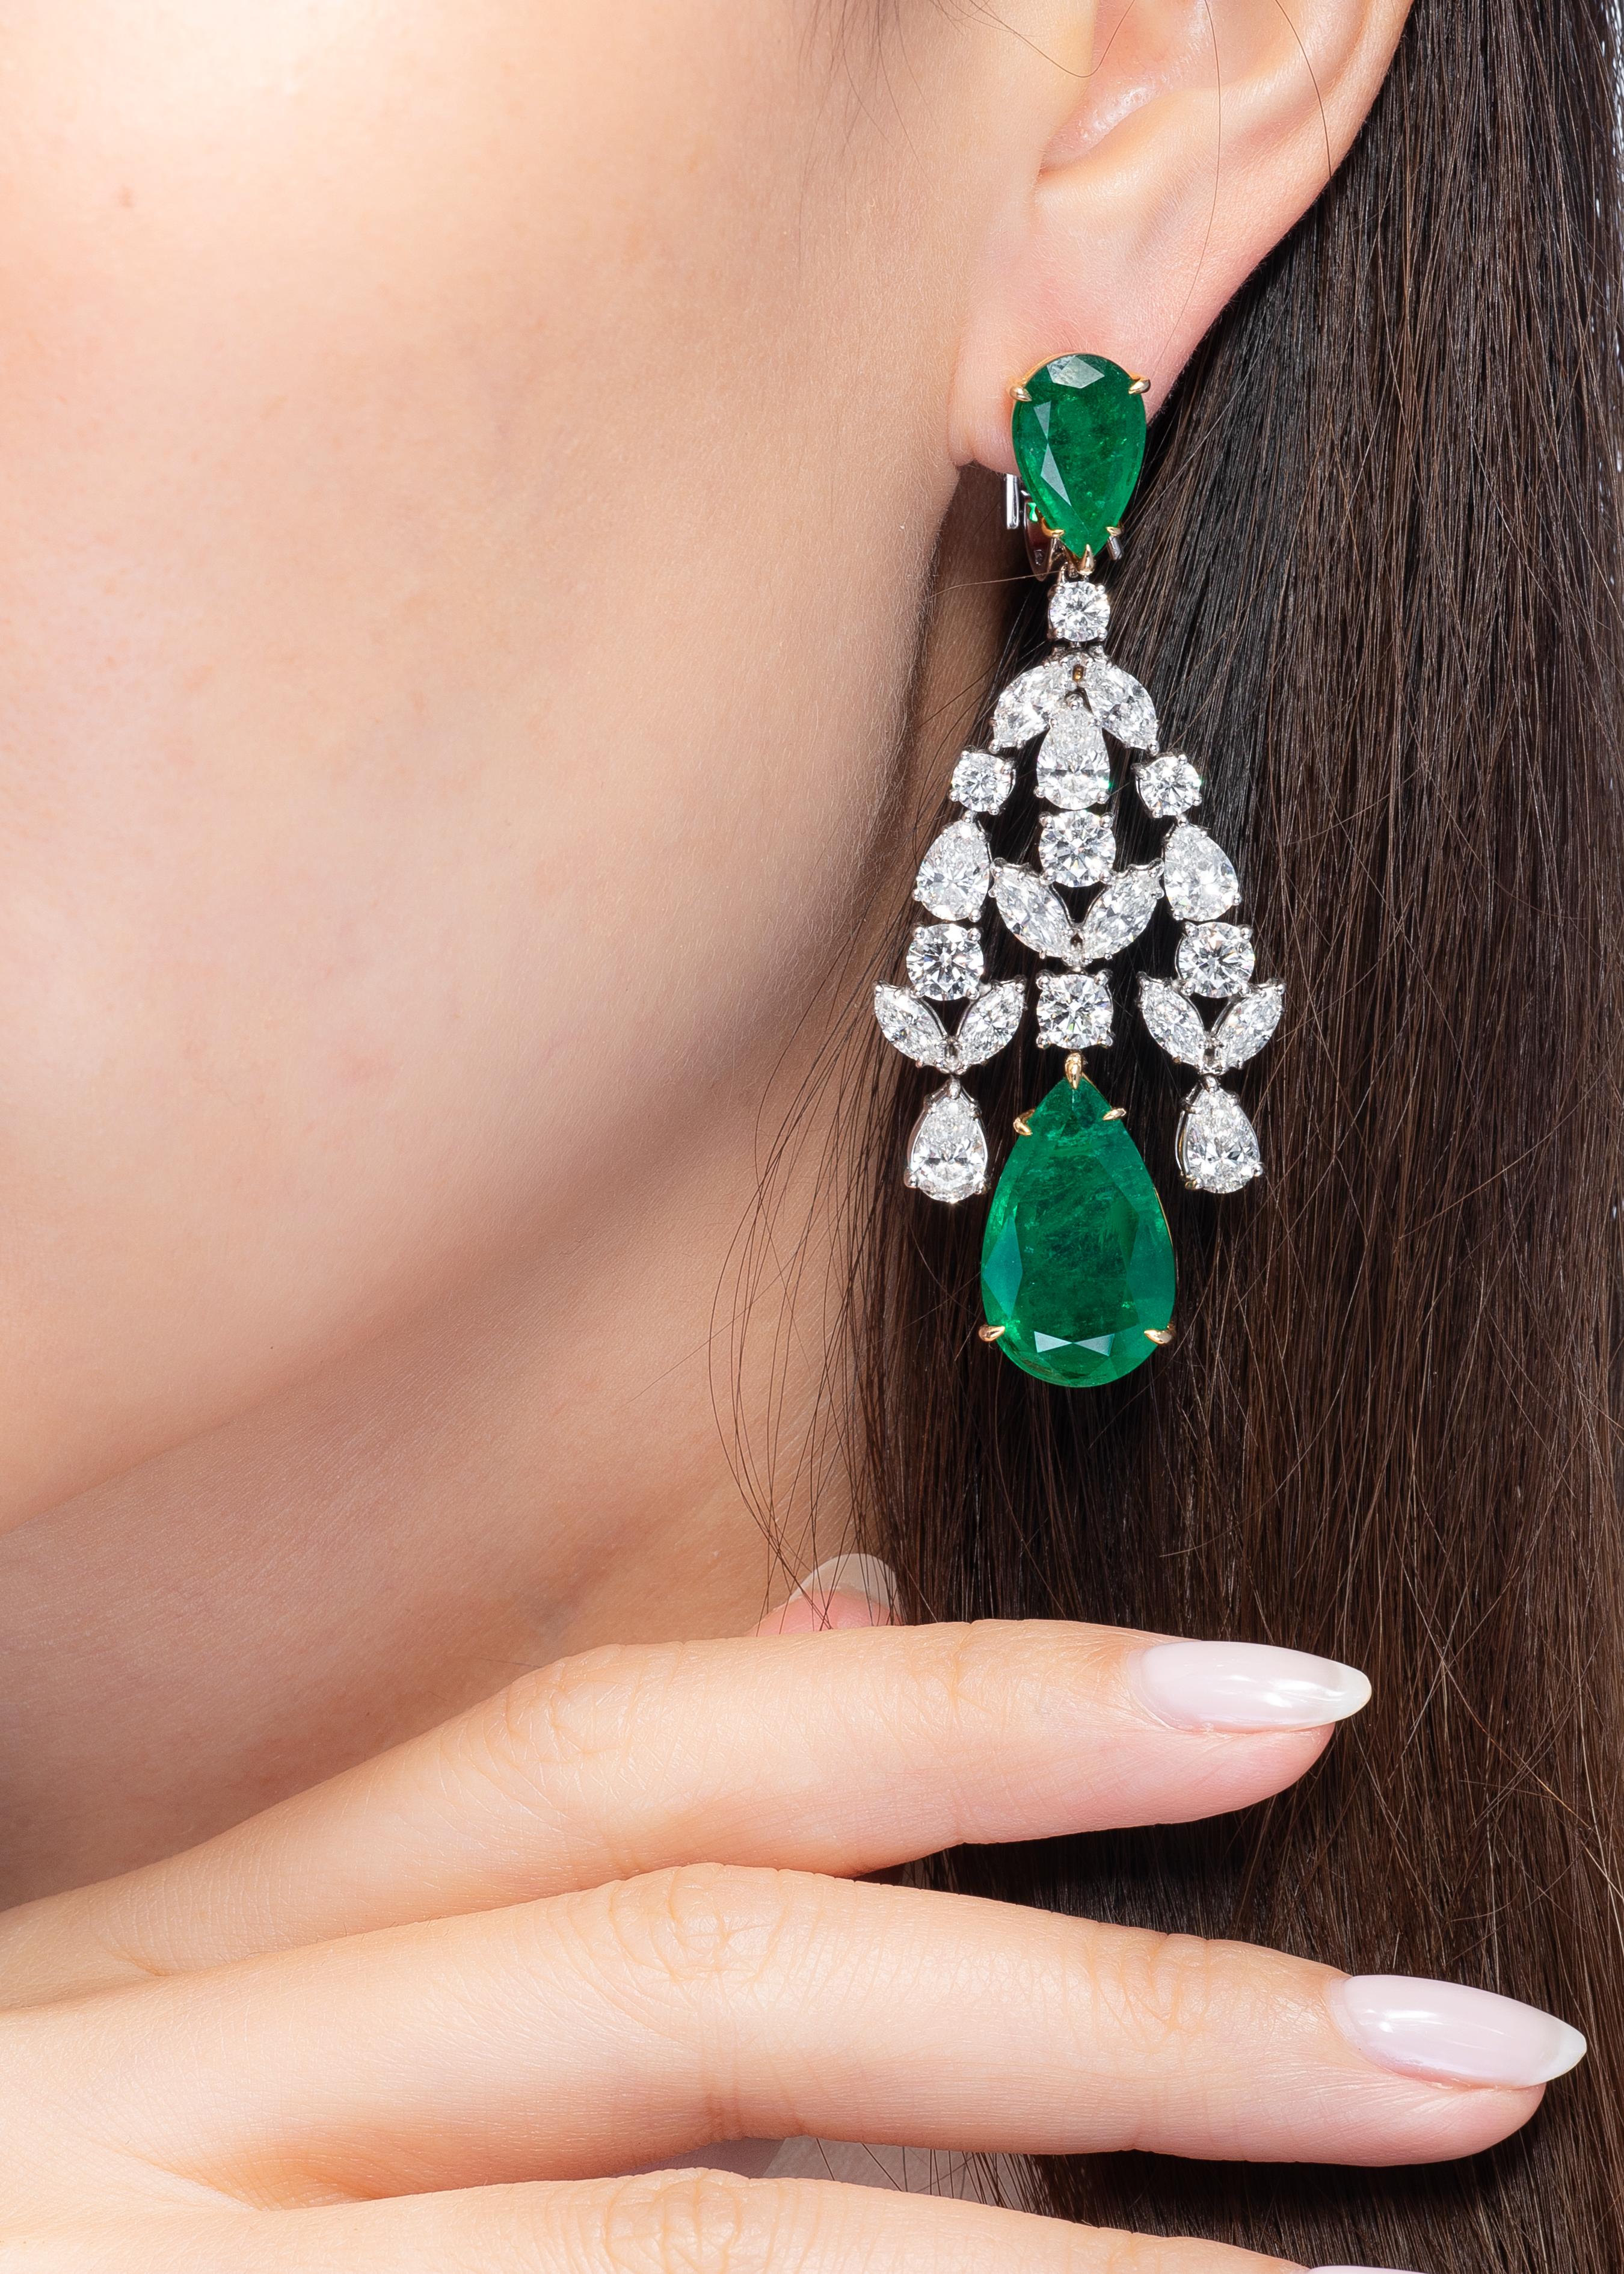 This exquisite pair of Vihari Jewels chandelier earrings feature four pear shaped Zambian Emeralds totaling 32.52 carats. GRS Report #2014-104562 certifies the Emeralds to have insignificant oil. The emeralds are accompanied with pear, round and